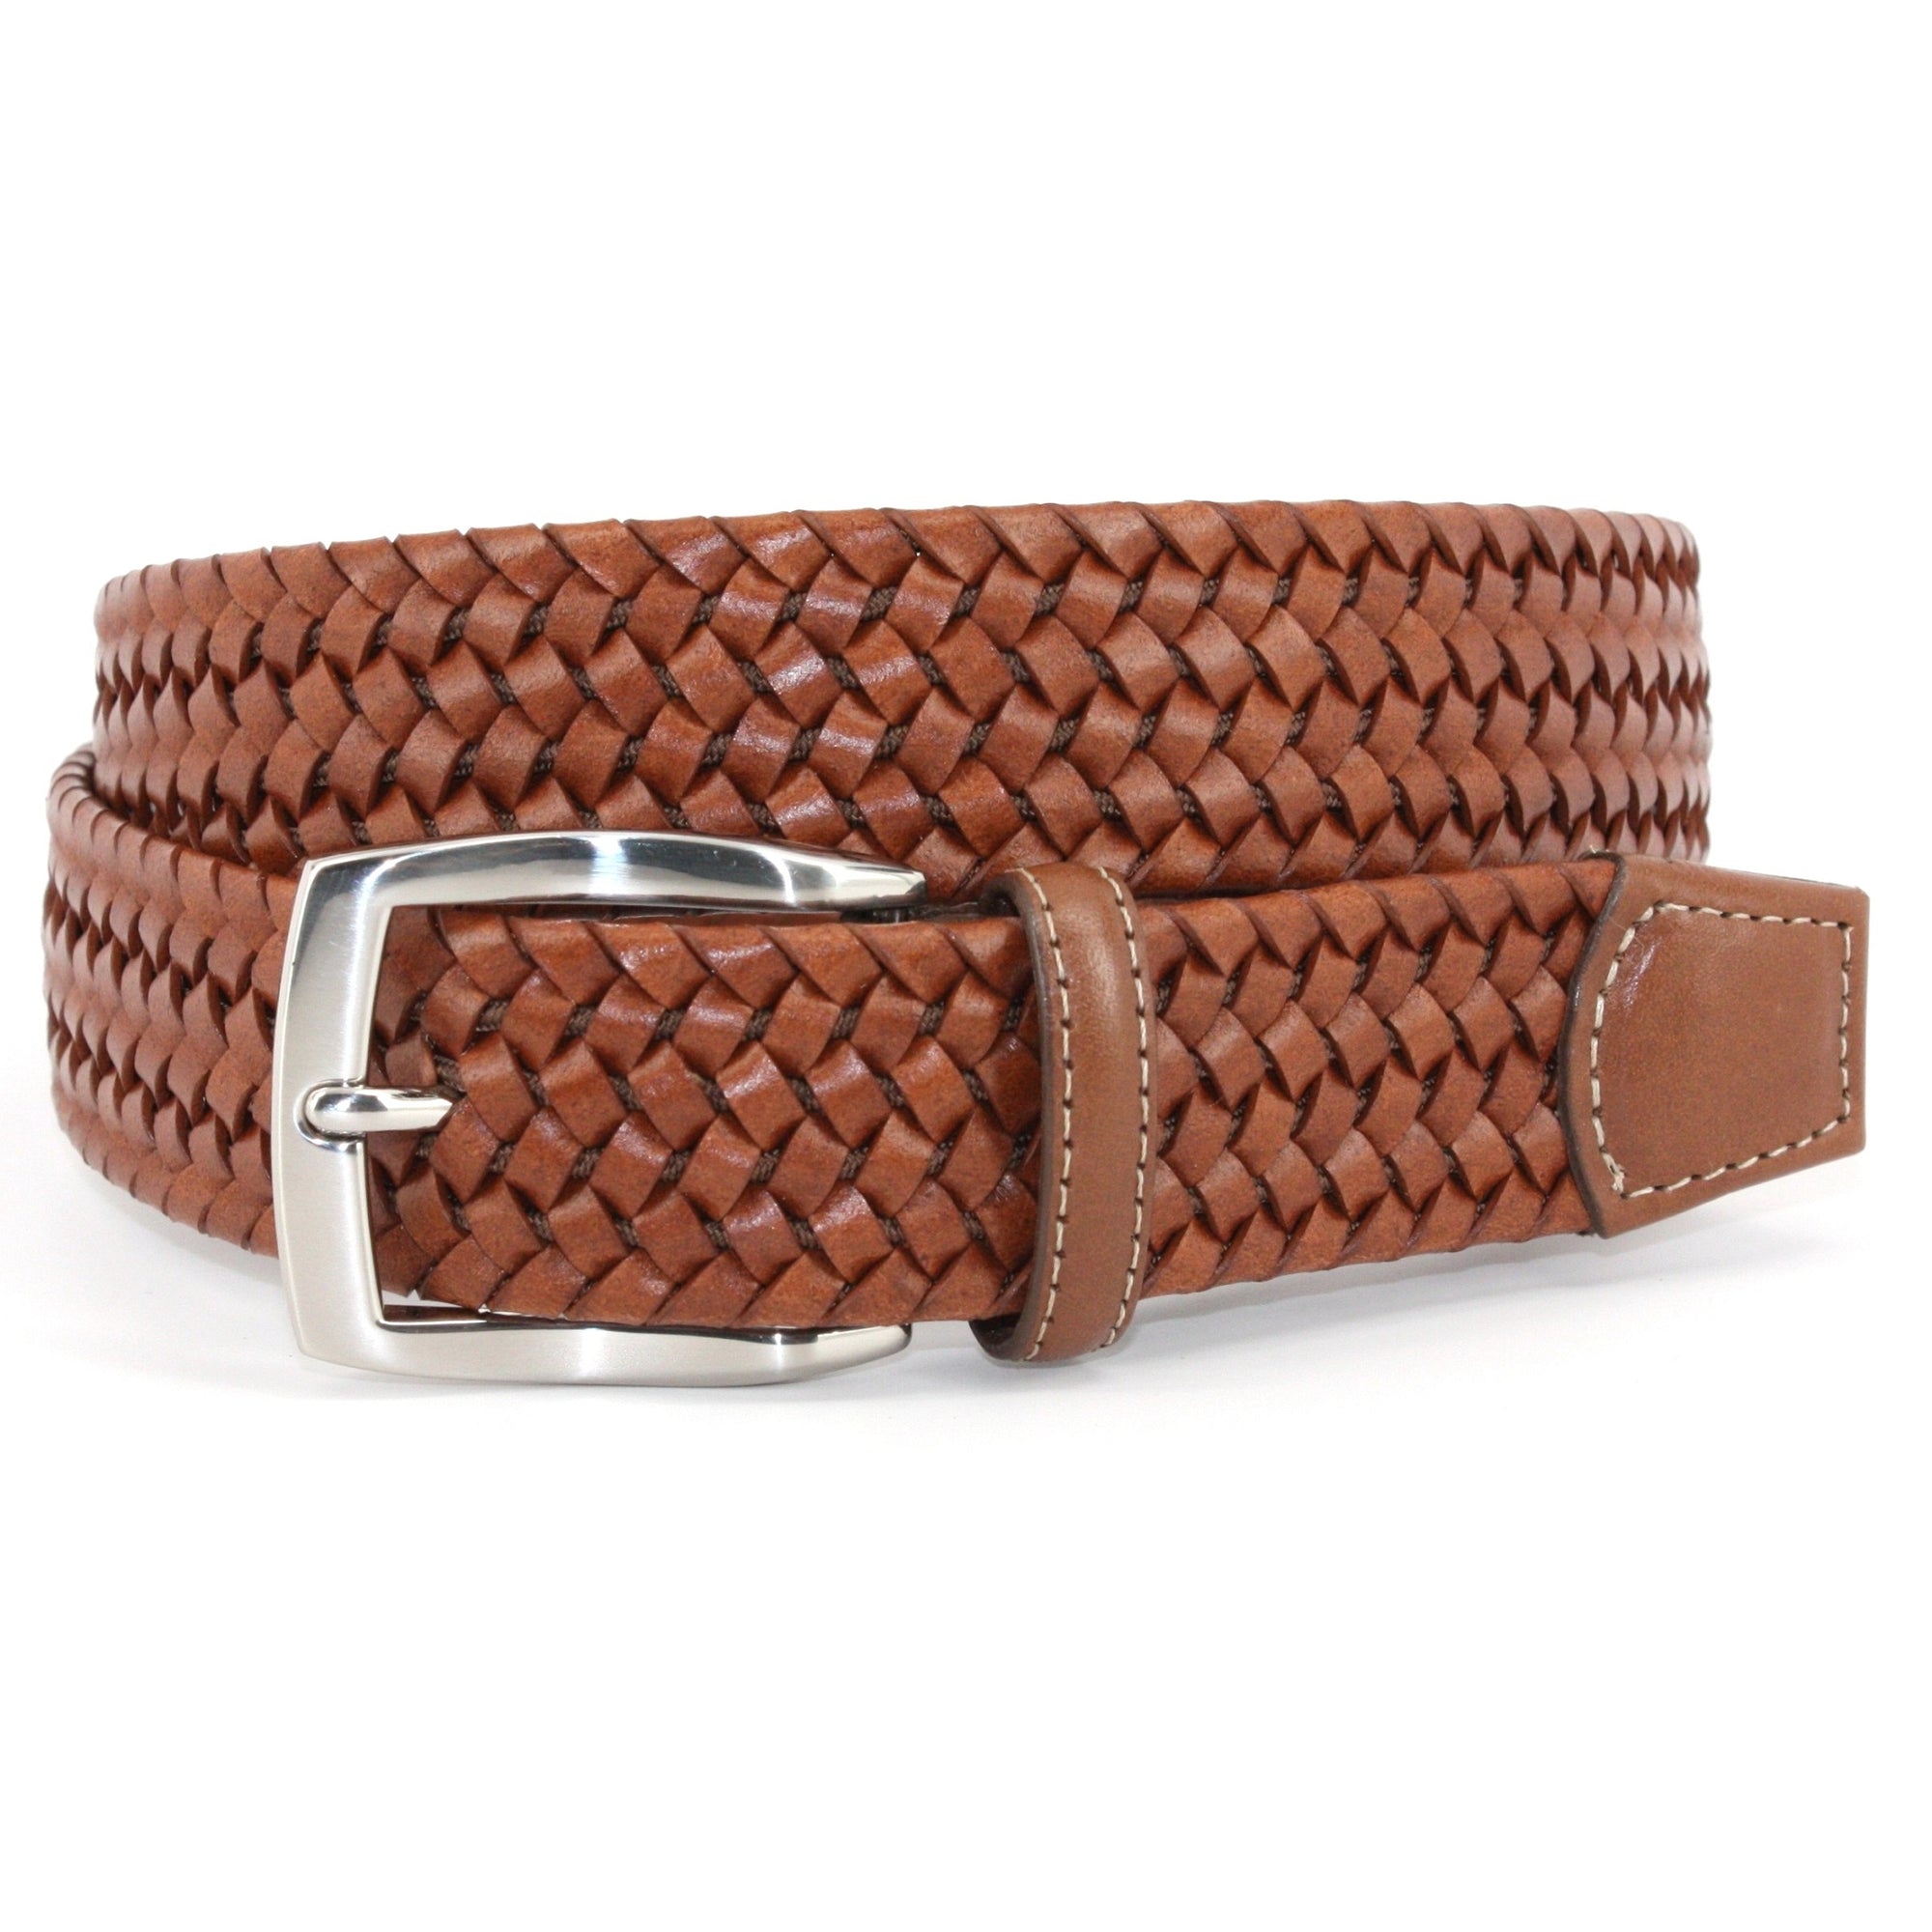 Italian Woven Stretch Leather Belt in Cognac by Torino Leather